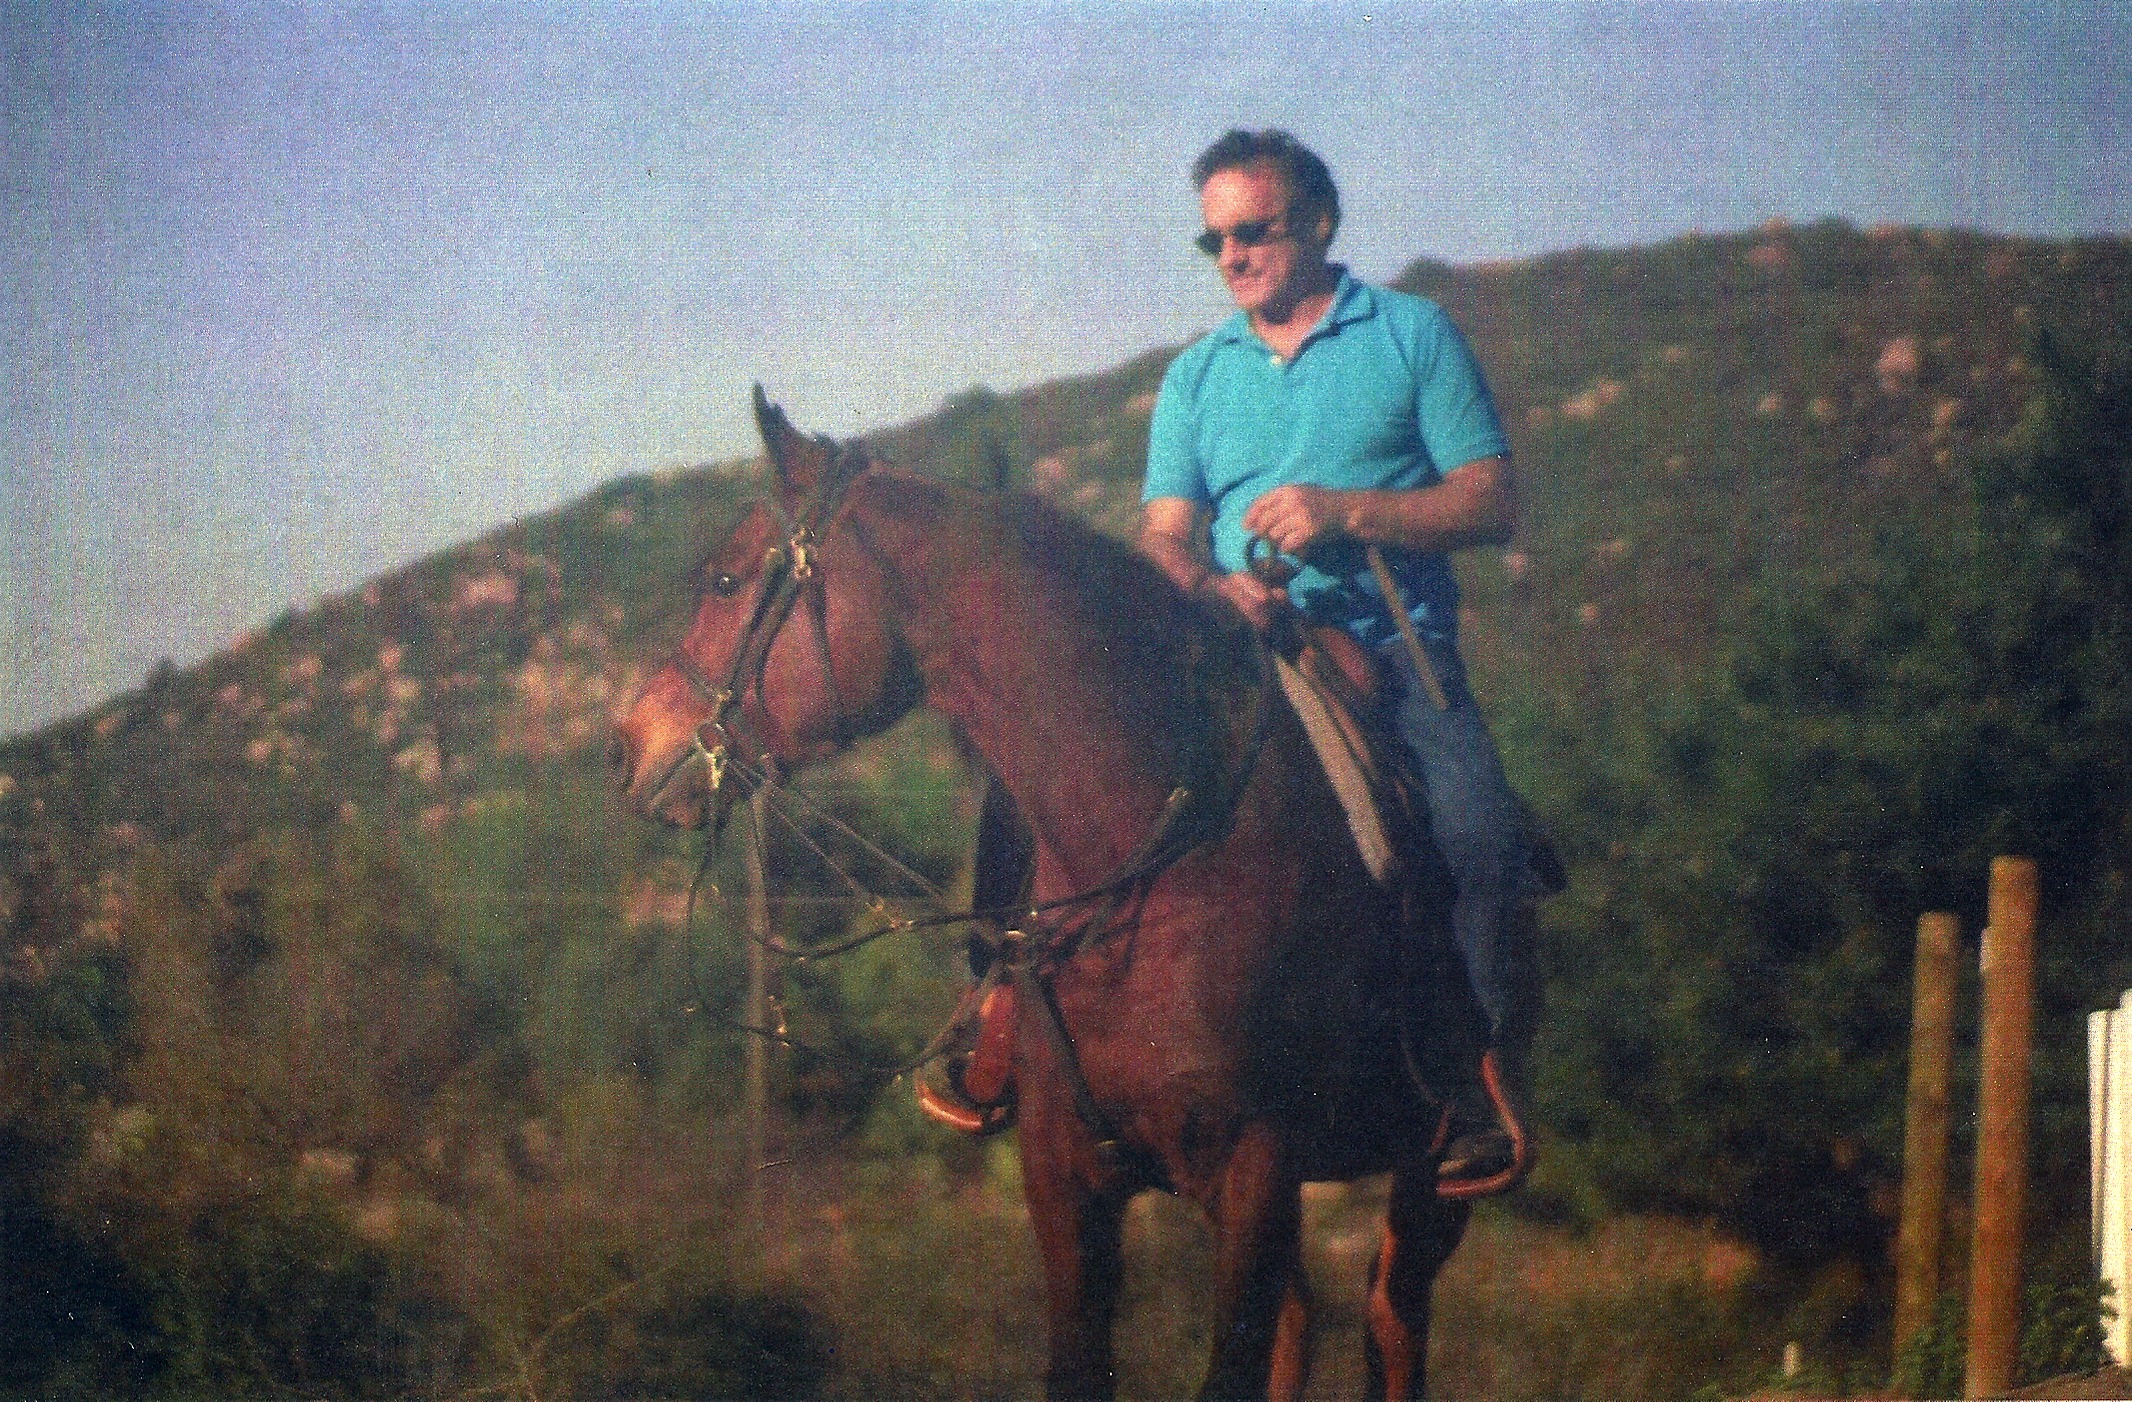 Richard D'Alessandro on his Arabian in the hills of Ca.He rides western and is pretty good with a rifle and pistol due to his Navel training and his friends he had in the NYPD and LAPD , who often took him to the gun range.